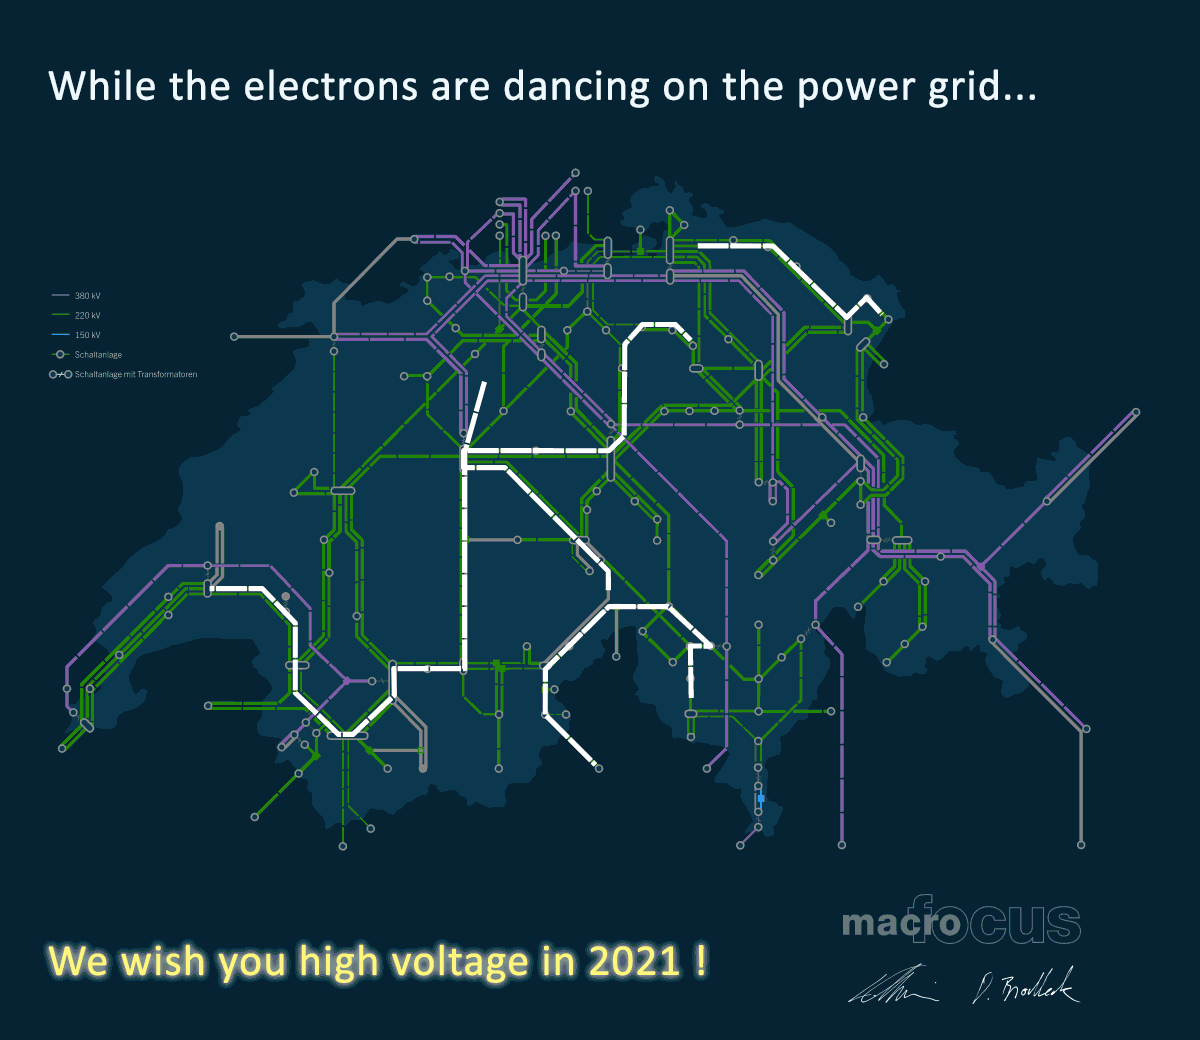 While the electrons are dancing on the power grid...